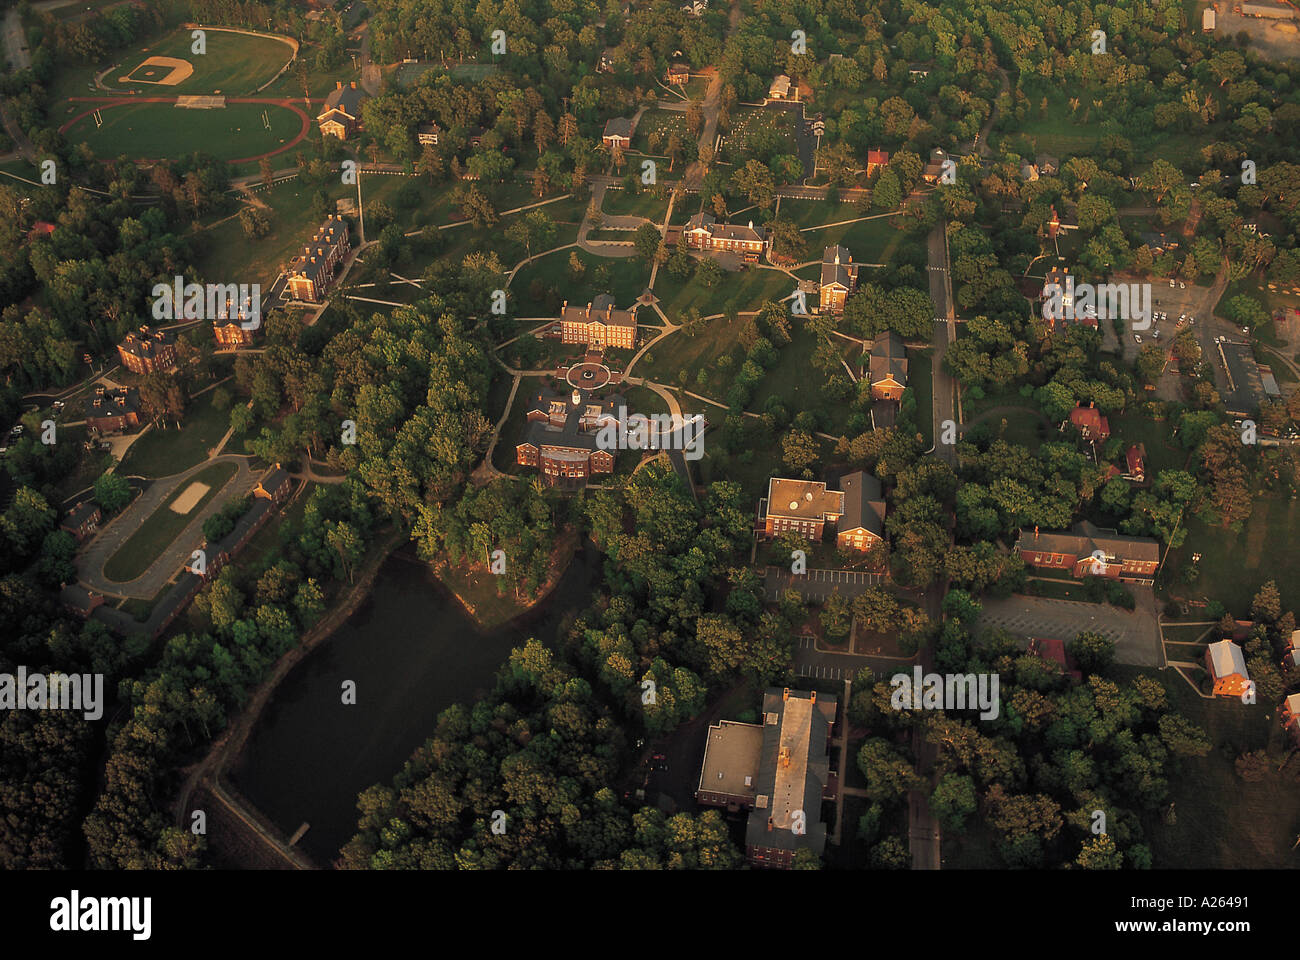 AERIAL VIEW OF COUNTRY HOUSE AND GROUNDS Stock Photo